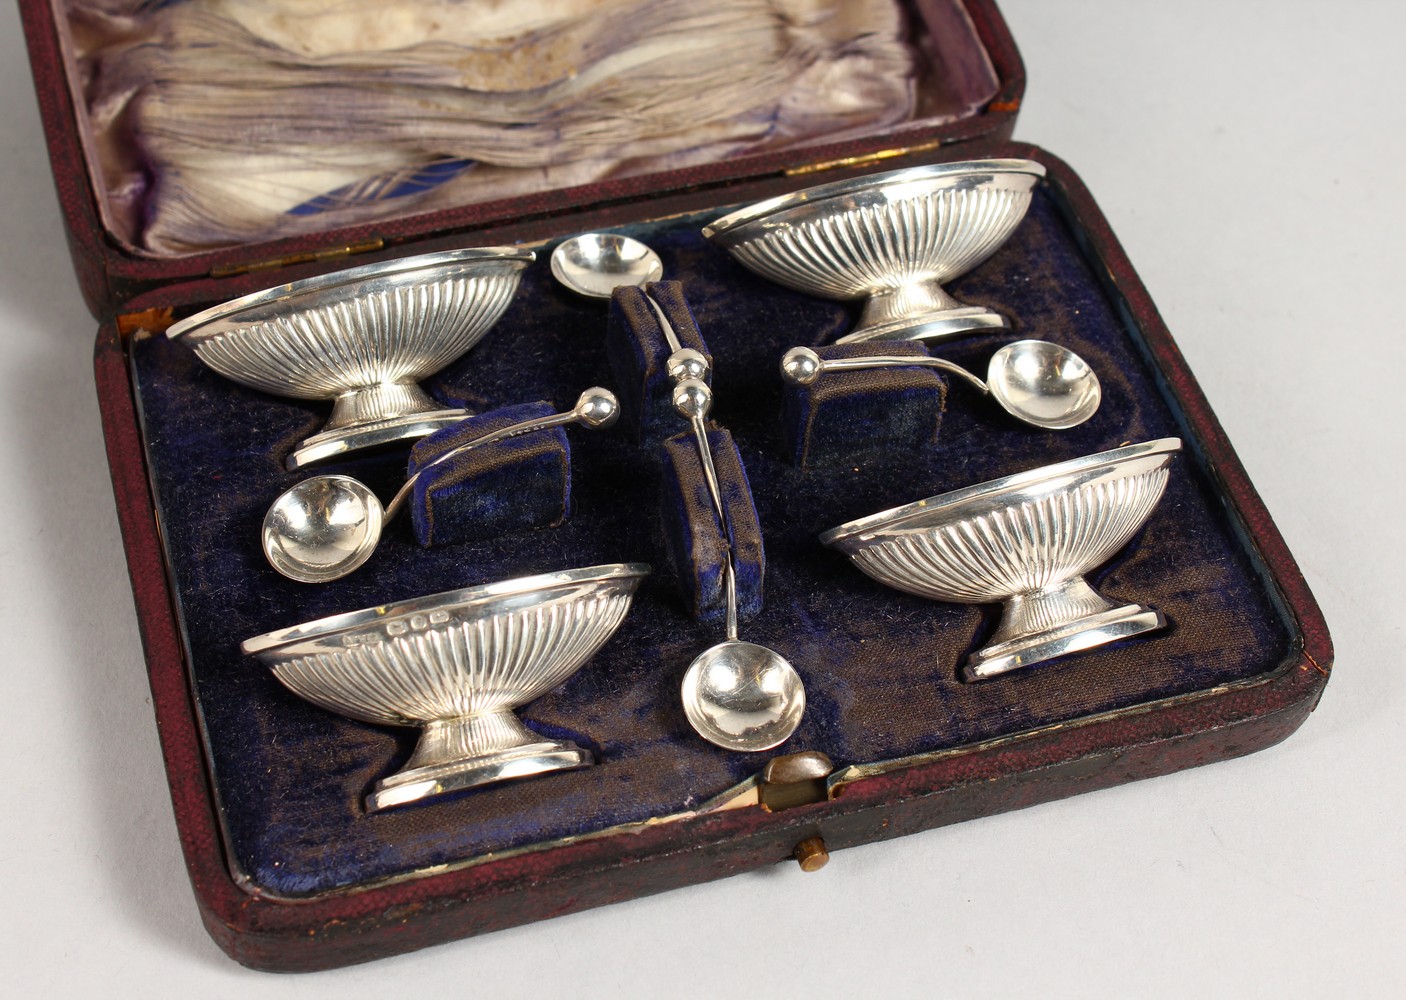 A CASED SET OF FOUR SMALL PEDESTAL SALTS WITH SPOONS.